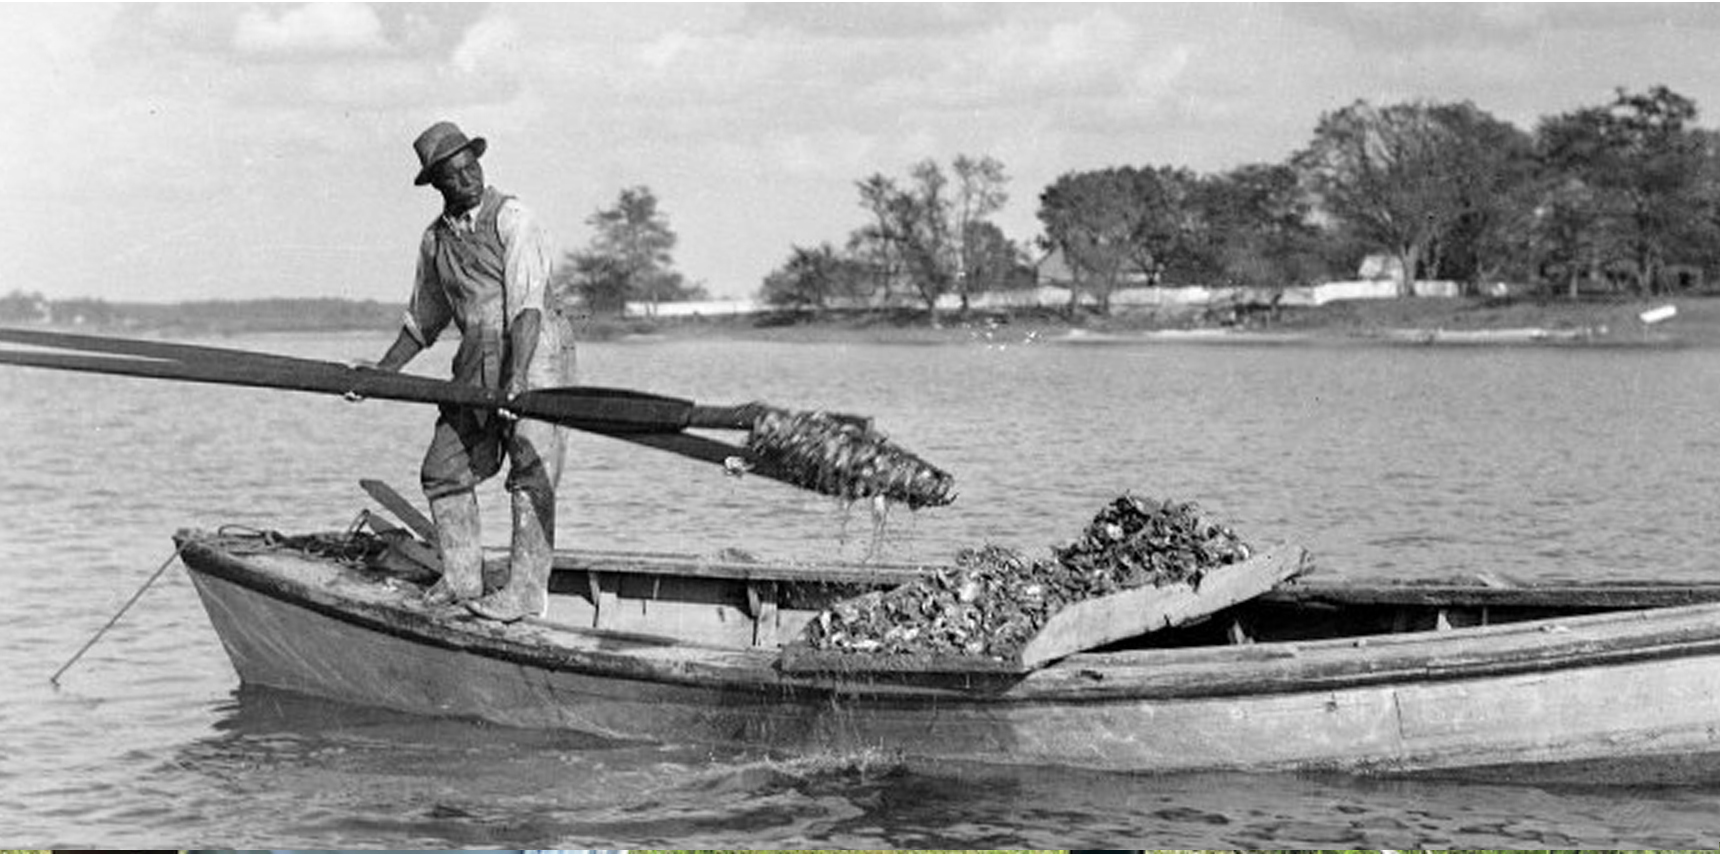 Black waterman using giant tongs to harvest oysters onto his skiff.